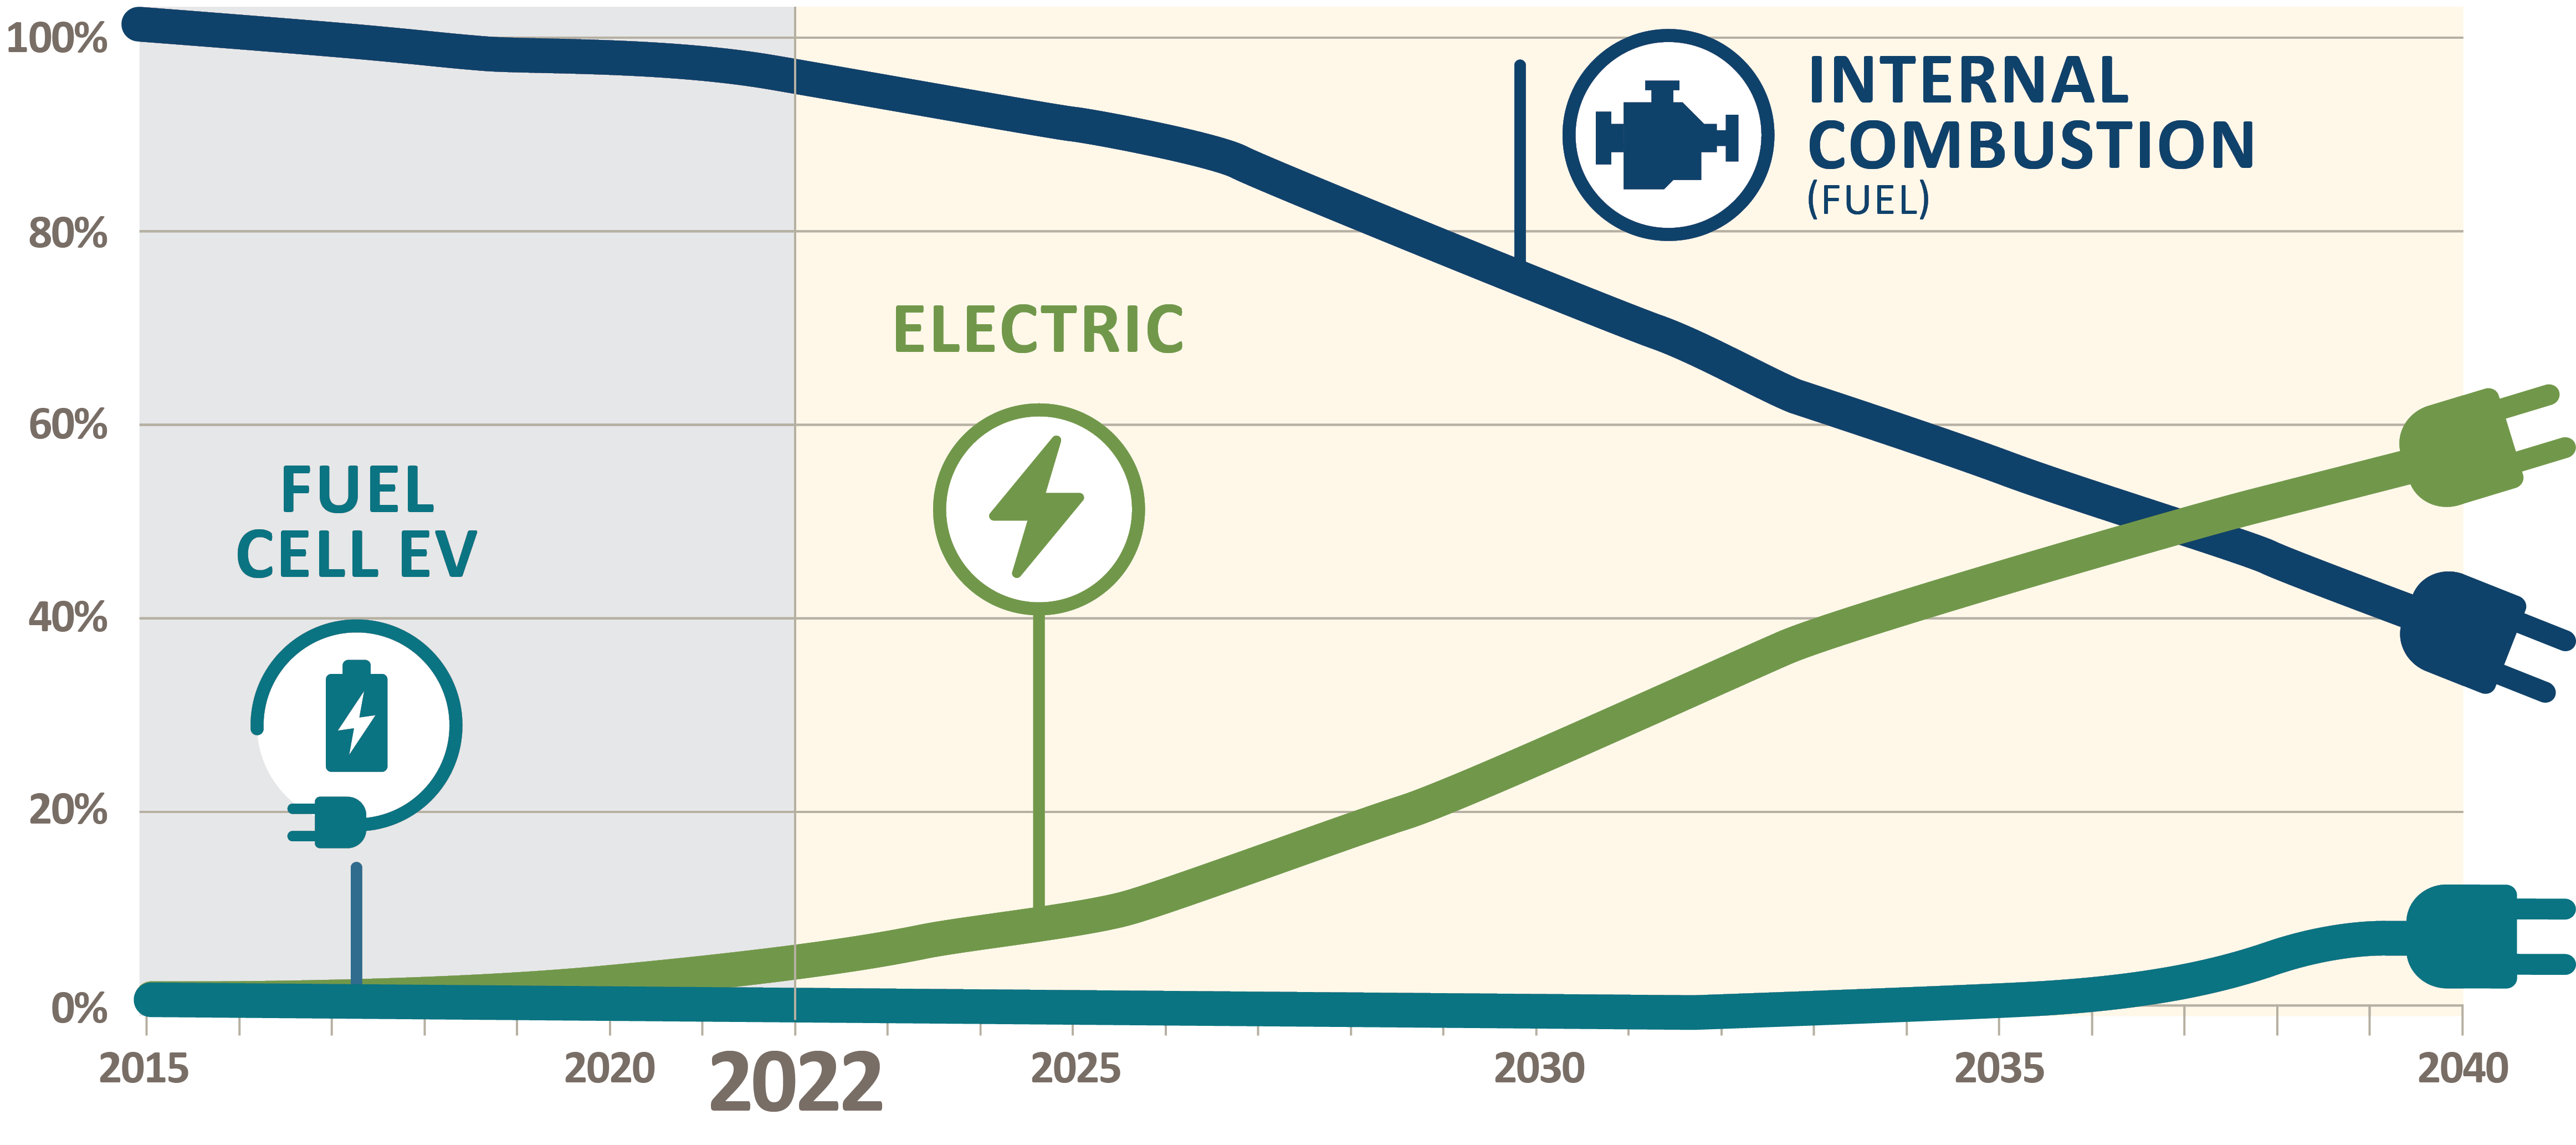 Chart showing EV at the 20% fo global passenger vehicle share point in the late 2020's; reaching the 40% mark by about 2035; and nearing the 60% mark by 2040. By 2040 it is projected that internal combustion vehicles decrease to about 40% of the market share.